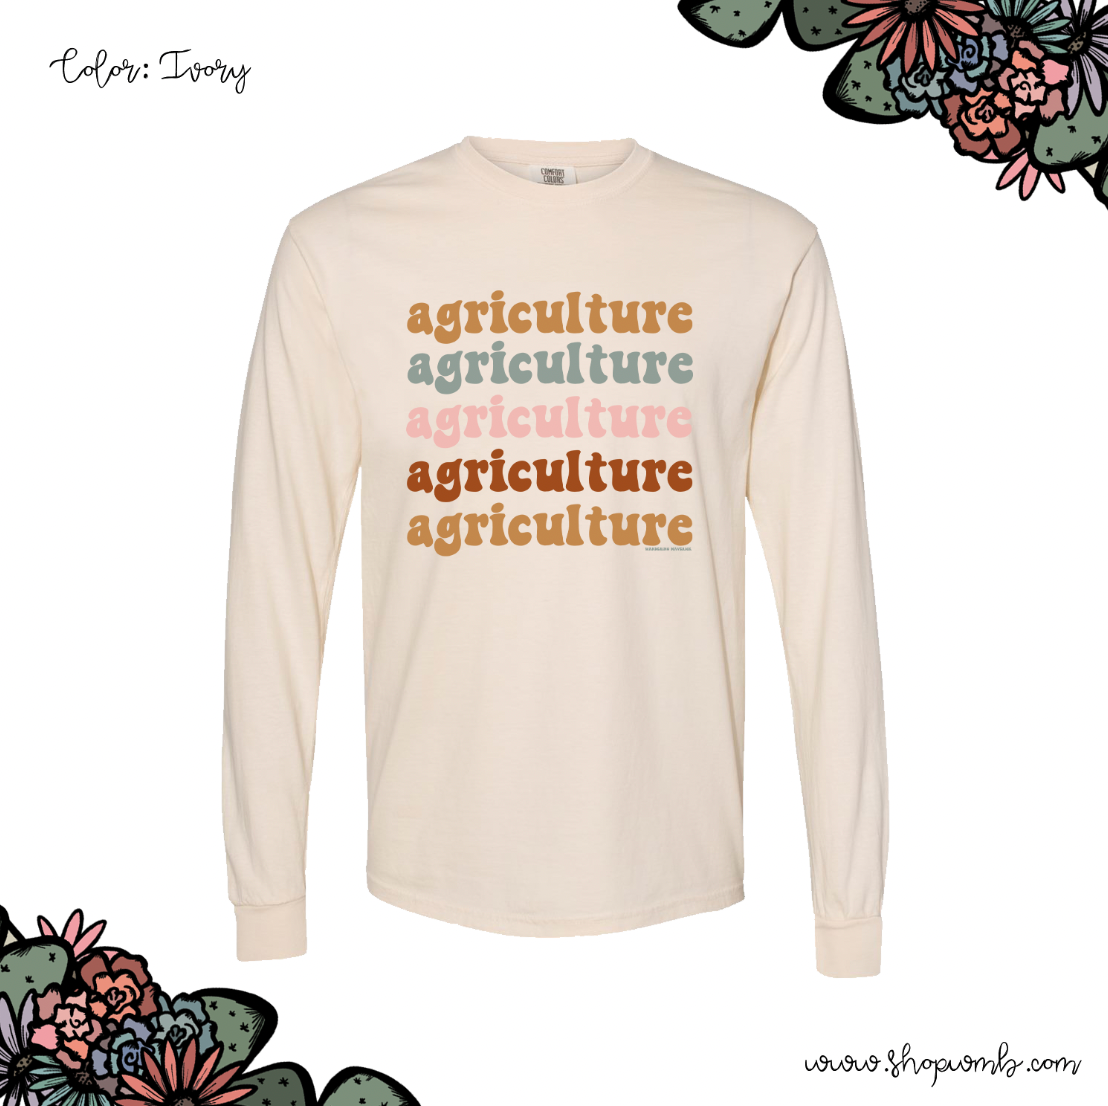 Groovy Agriculture LONG SLEEVE T-Shirt (S-3XL) - Multiple Colors!